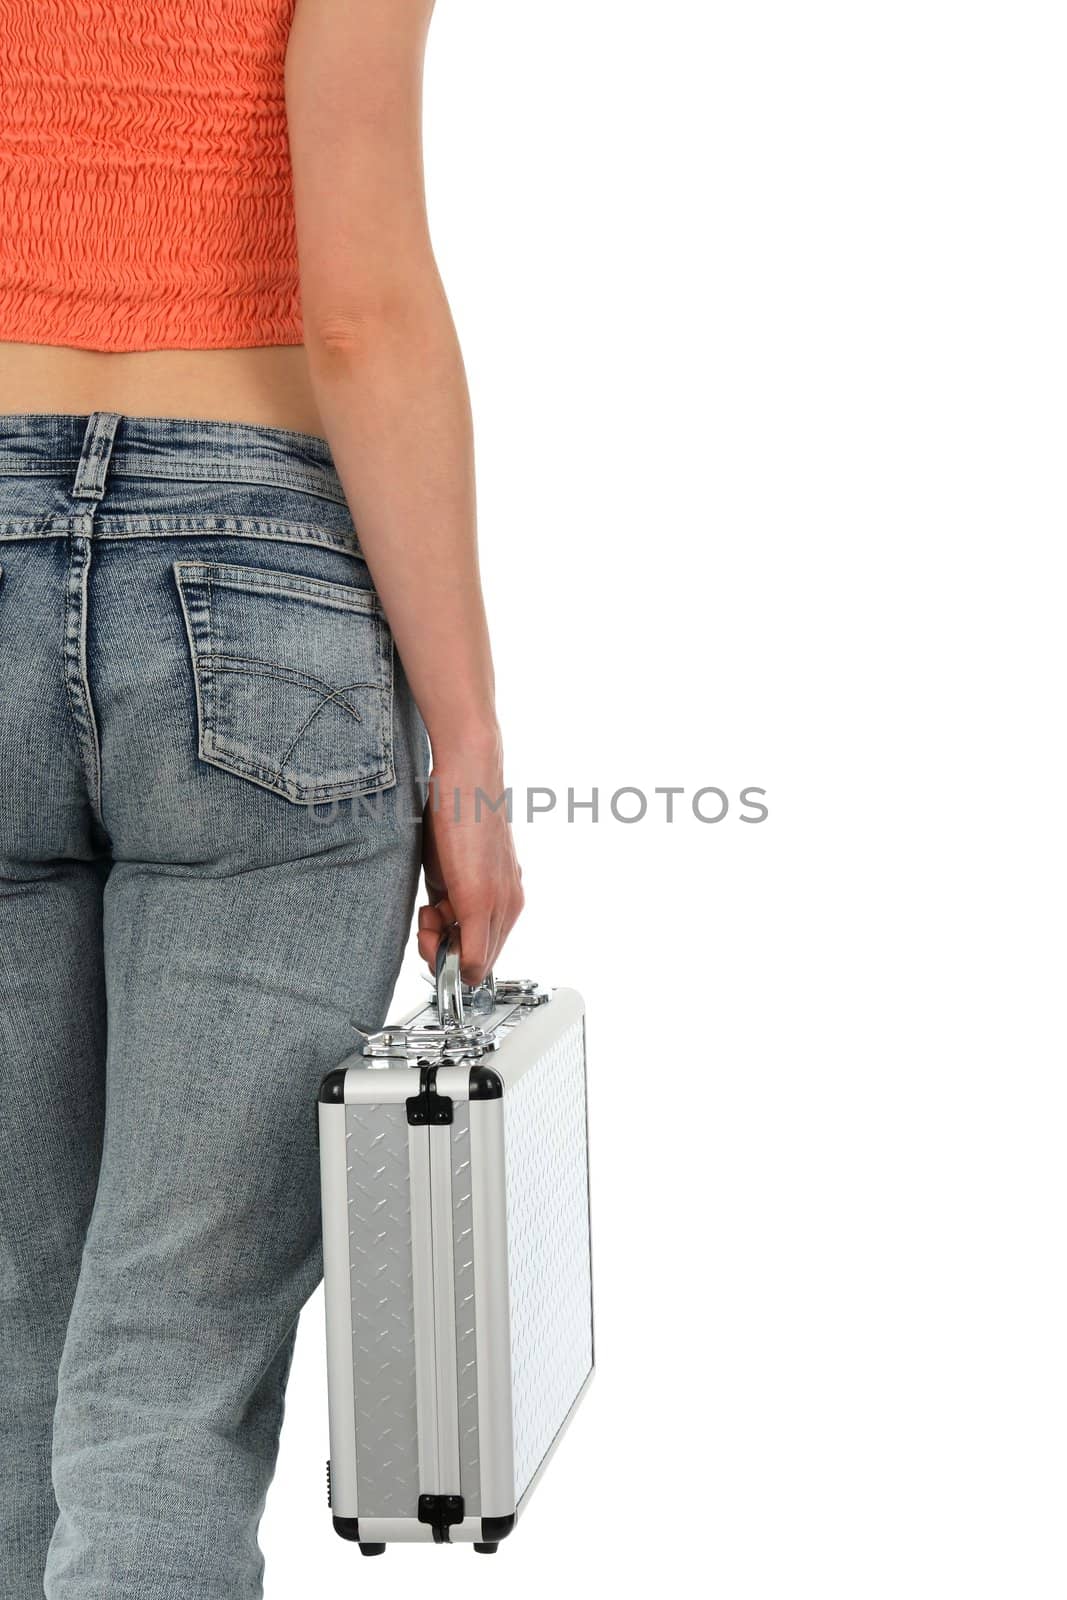 Young woman in blue jeans holding a metal case.